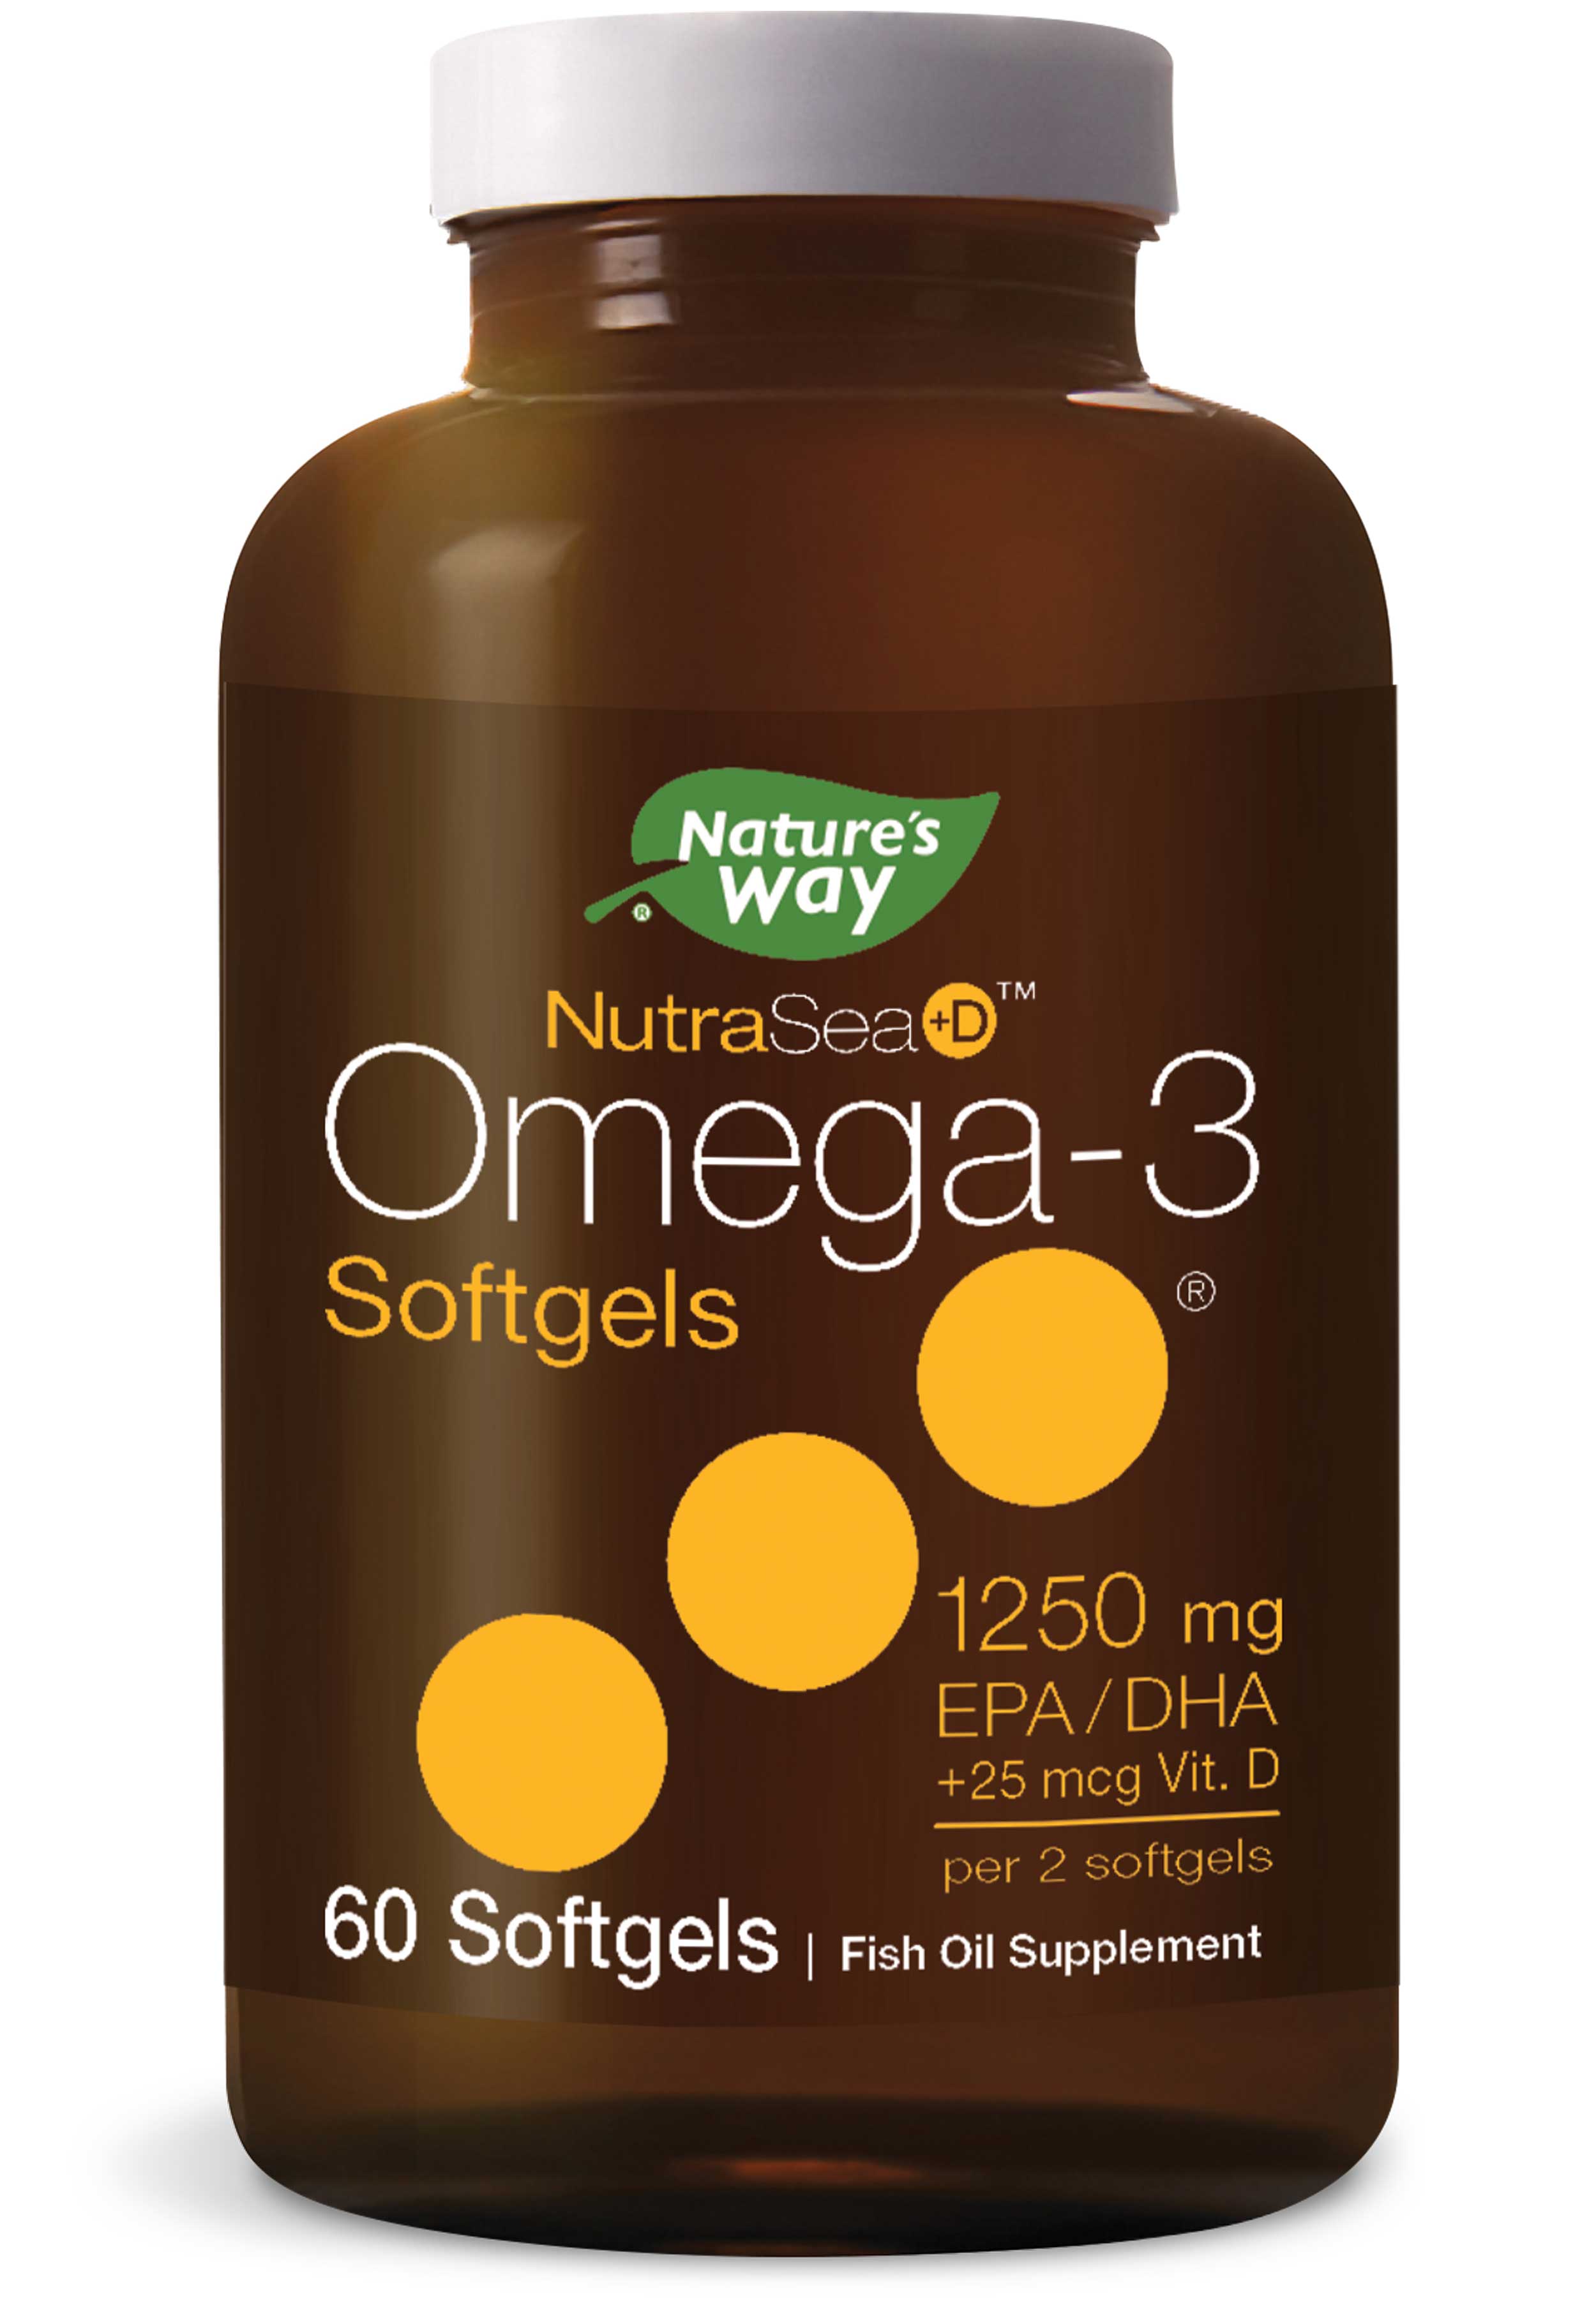 Nature's Way NutraSea +D Omega-3